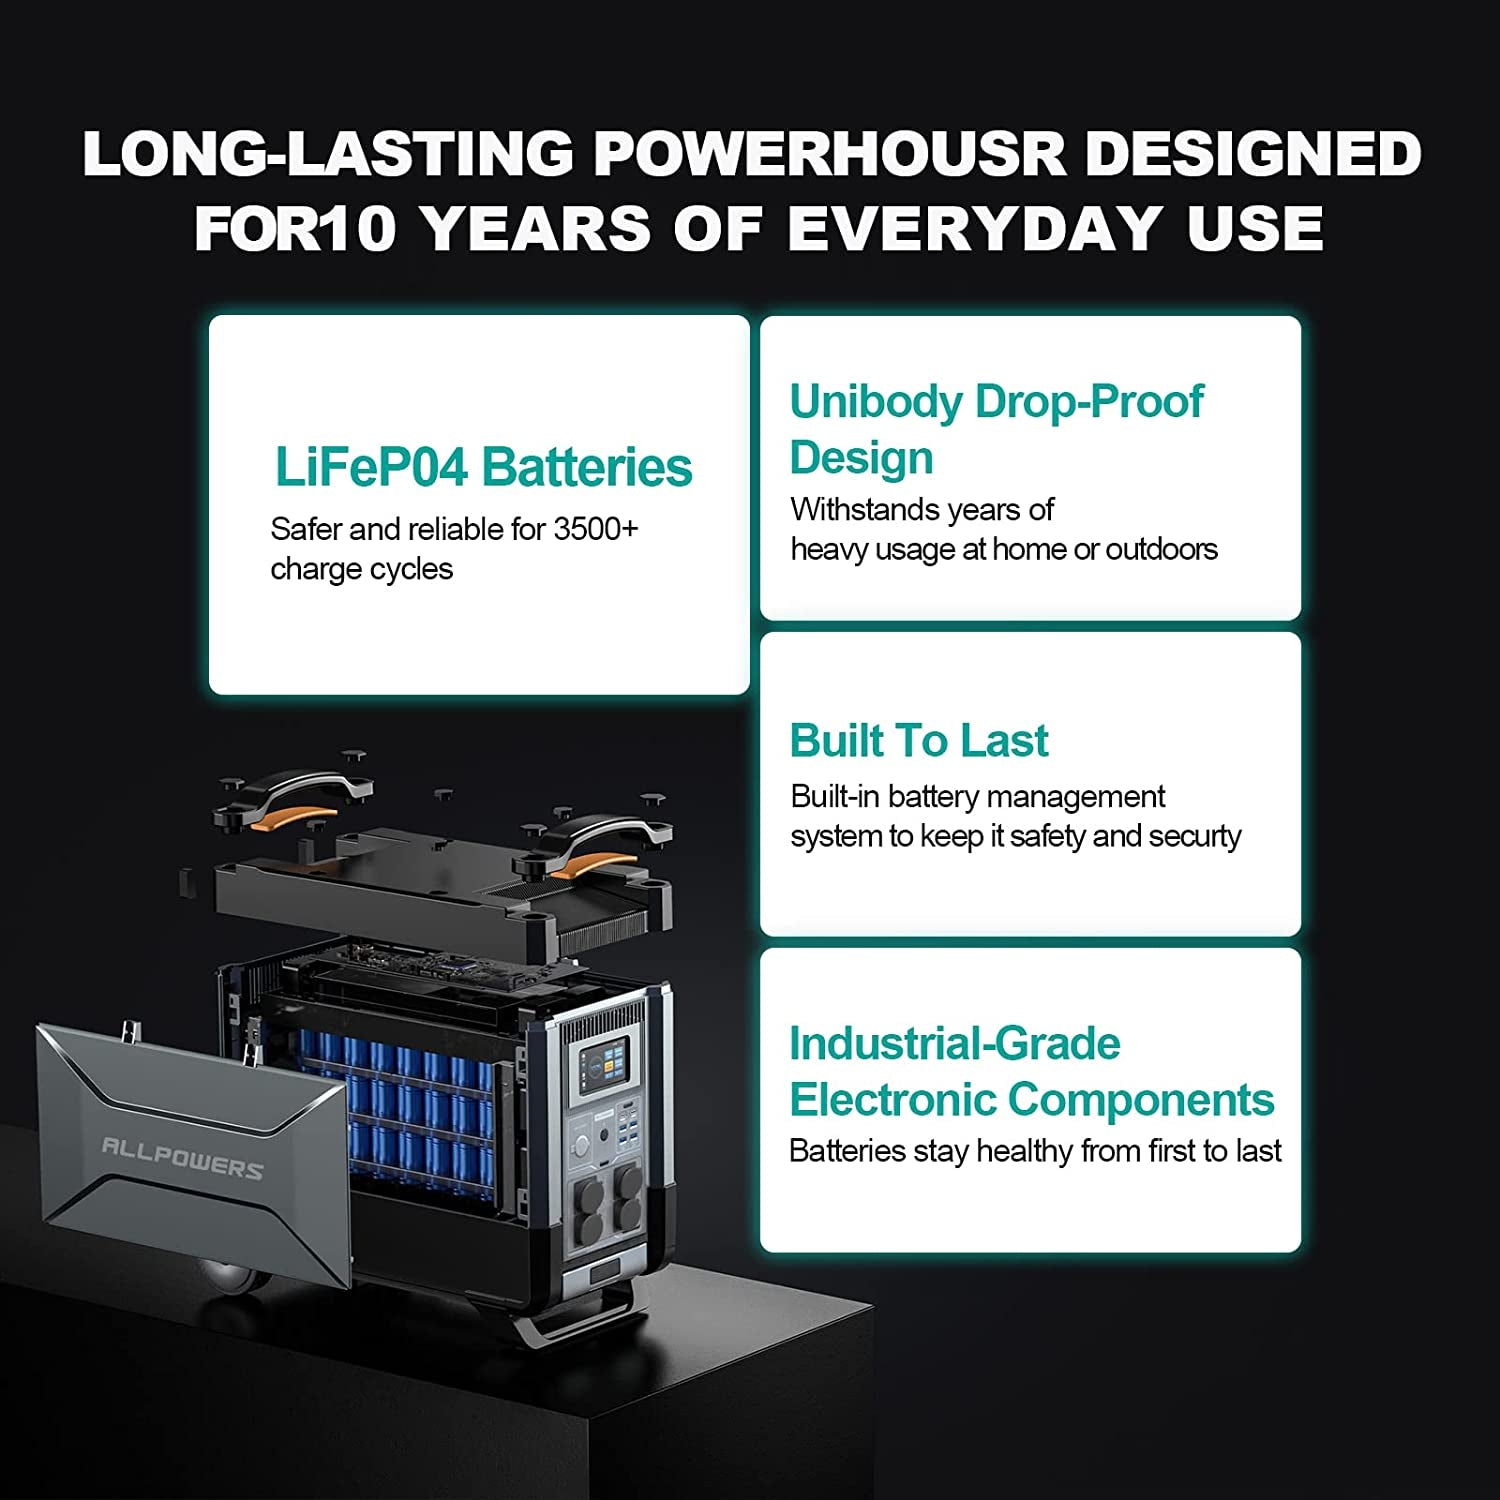 R4000 Lifepo4 Battery, 3600Wh Power Station 4000W Portable Generator, Expandable Battery for Power Outage, Travel，Ups